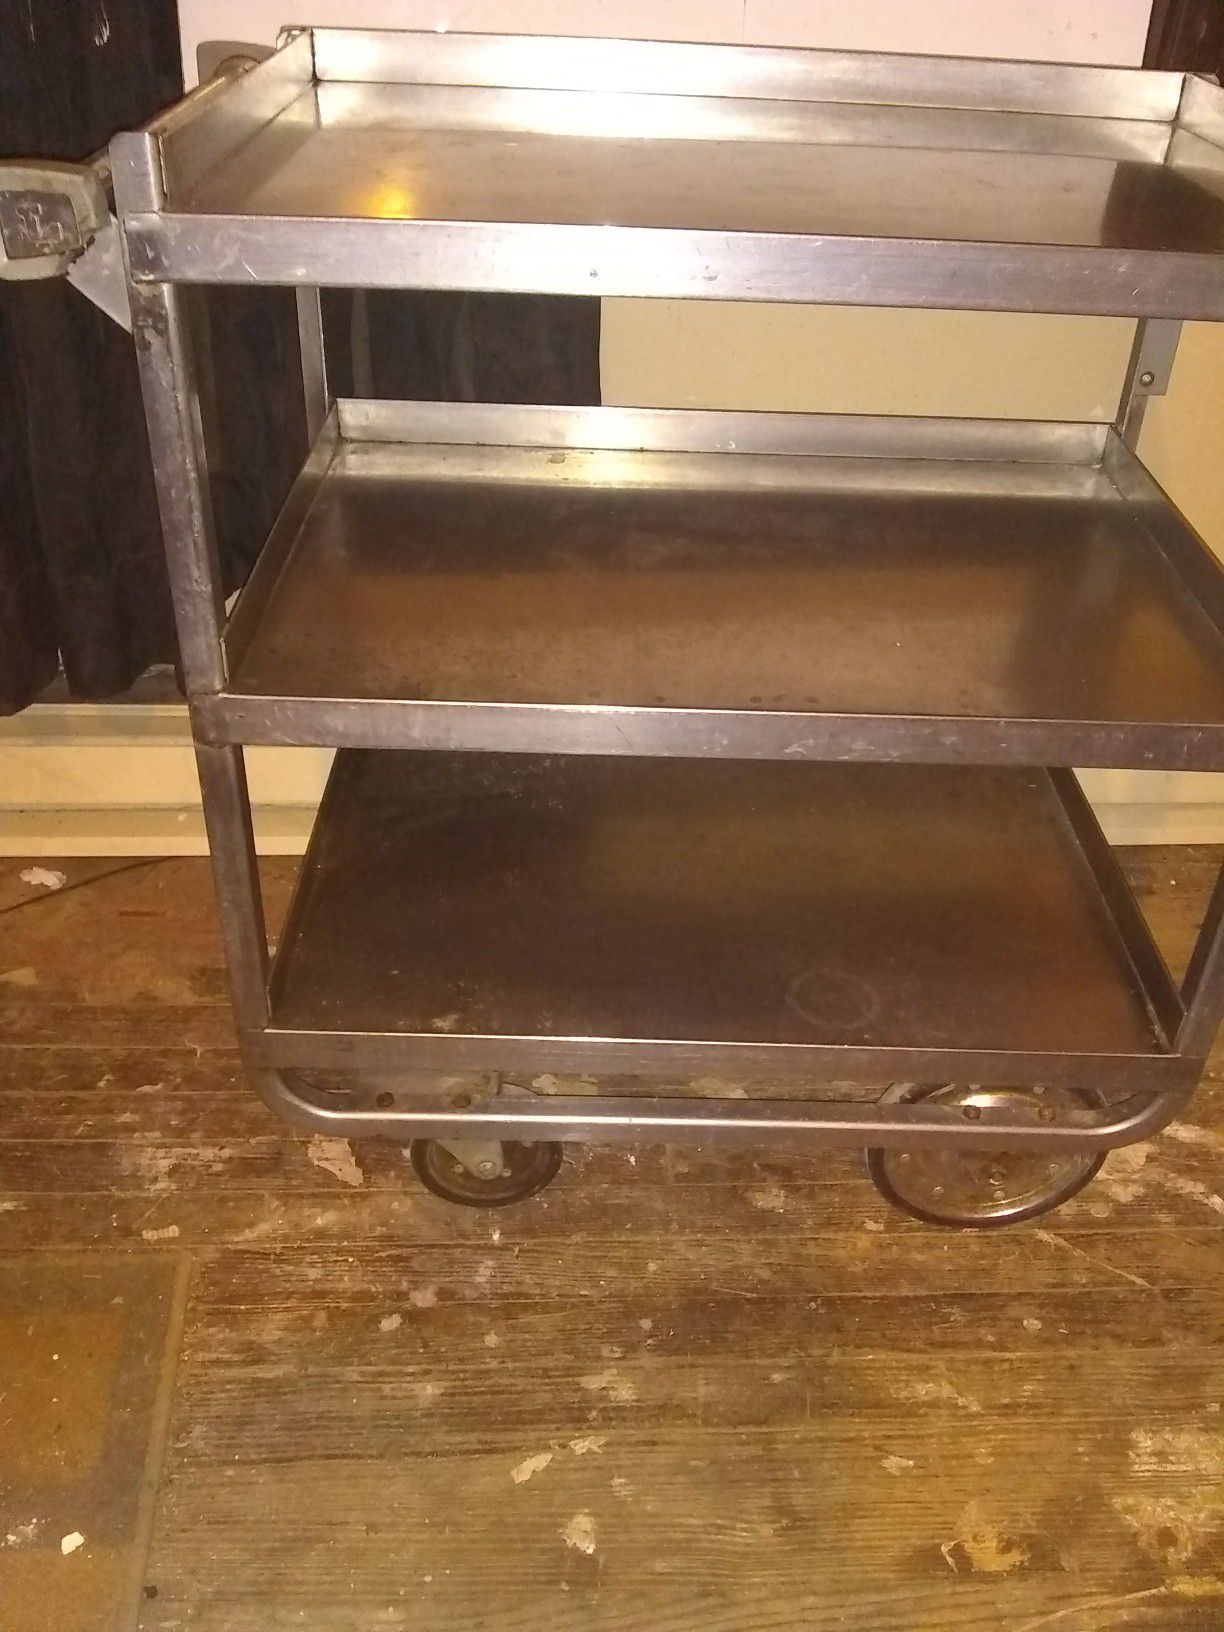 Heavy duty stainless cart